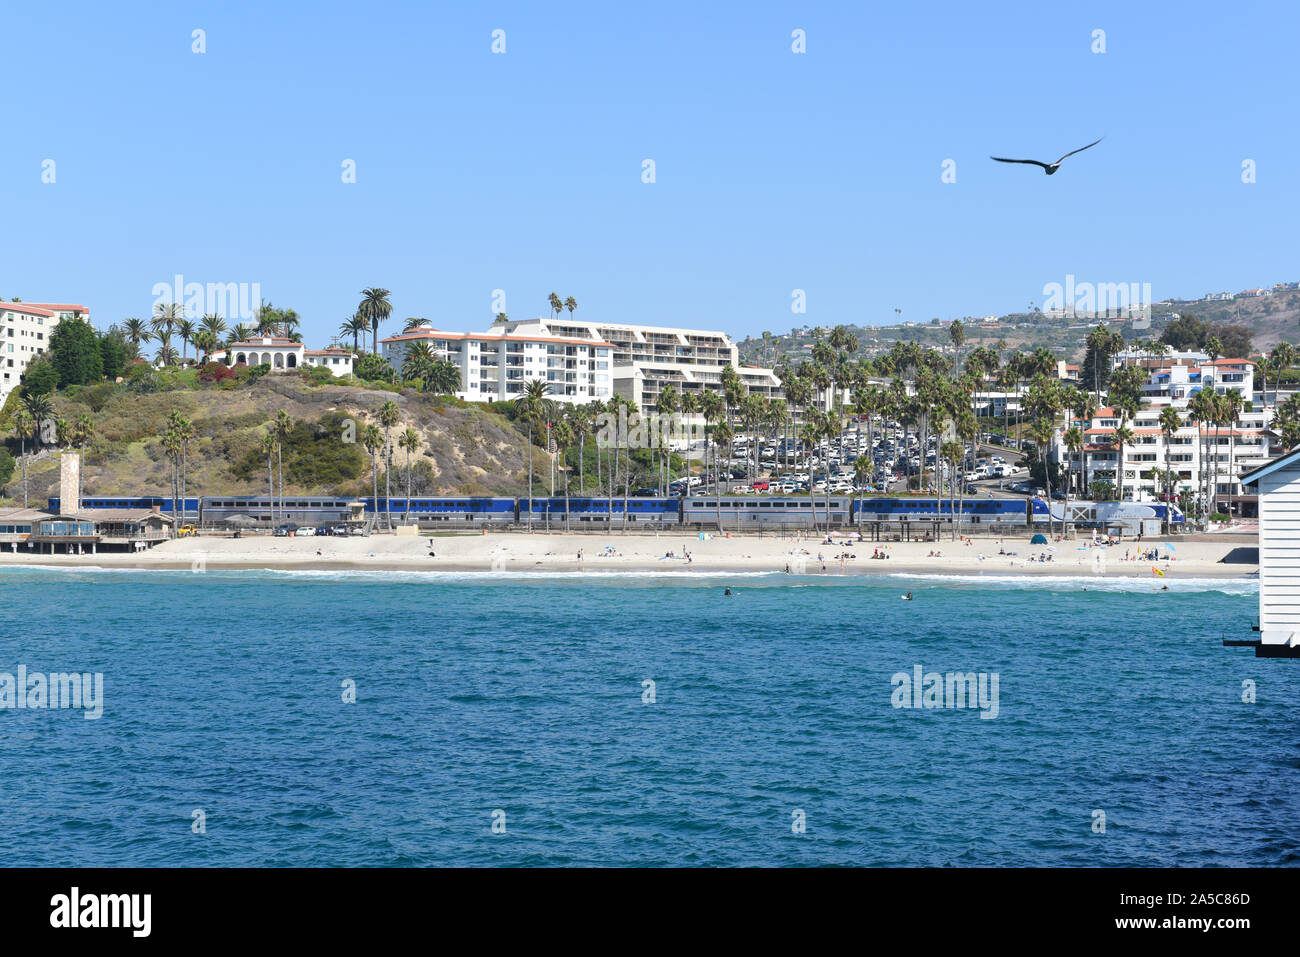 SAN CLEMENTE, CALIFORNIA - 18 OCT 2019: The Pacific Surfliner, a 350 mile passenger train serving the communities between San Diego and San Luis Obisp Stock Photo